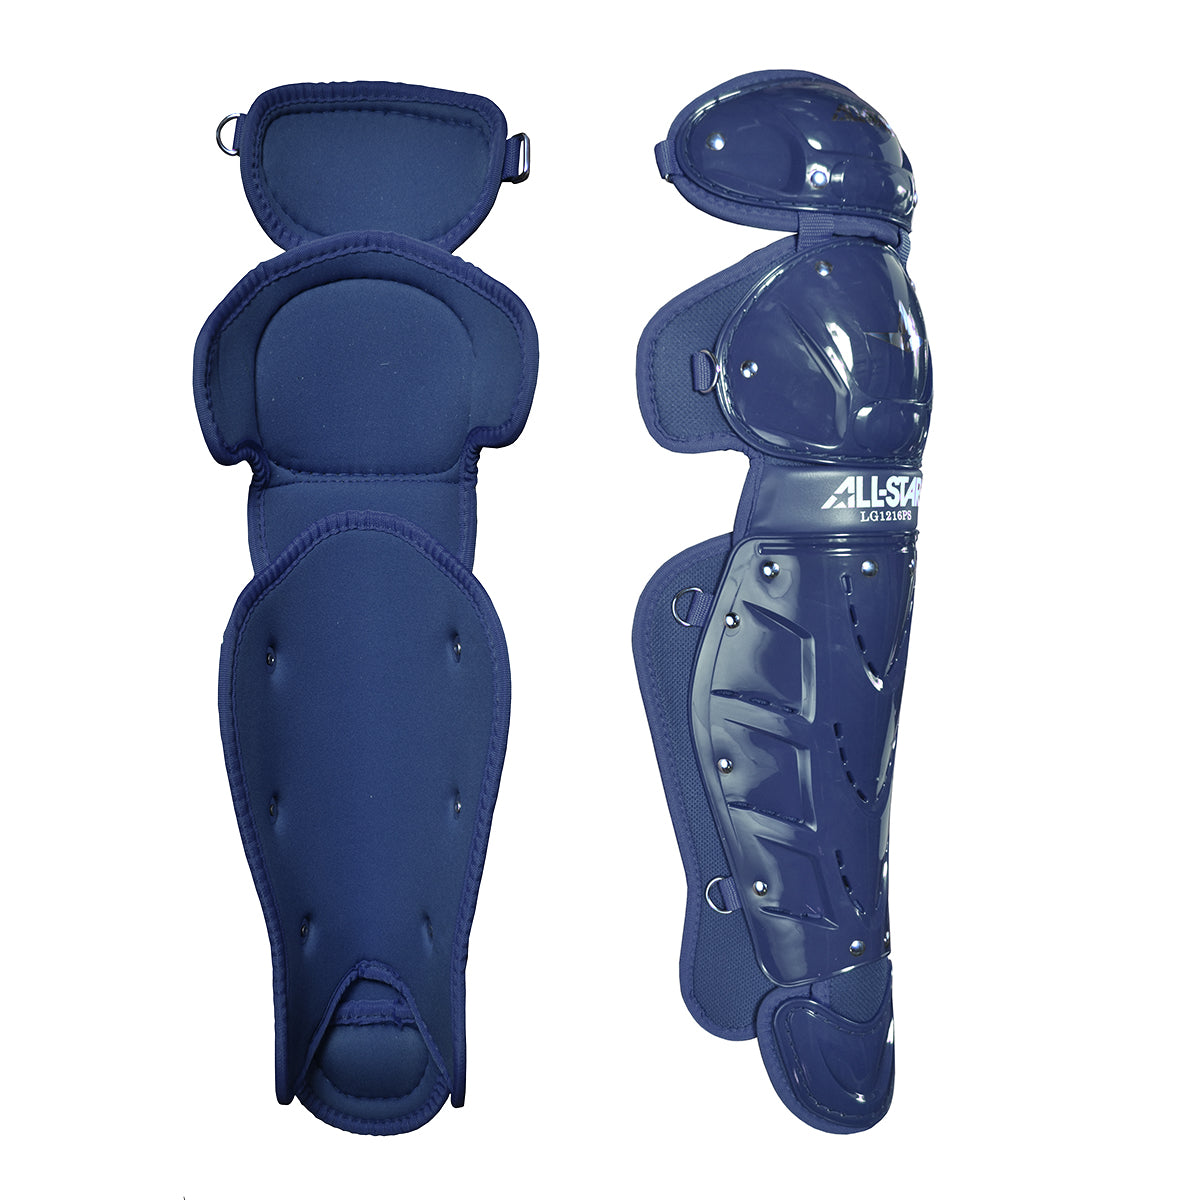 PLAYER'S SERIES™ AGES 12-16 LEG GUARDS (14.5